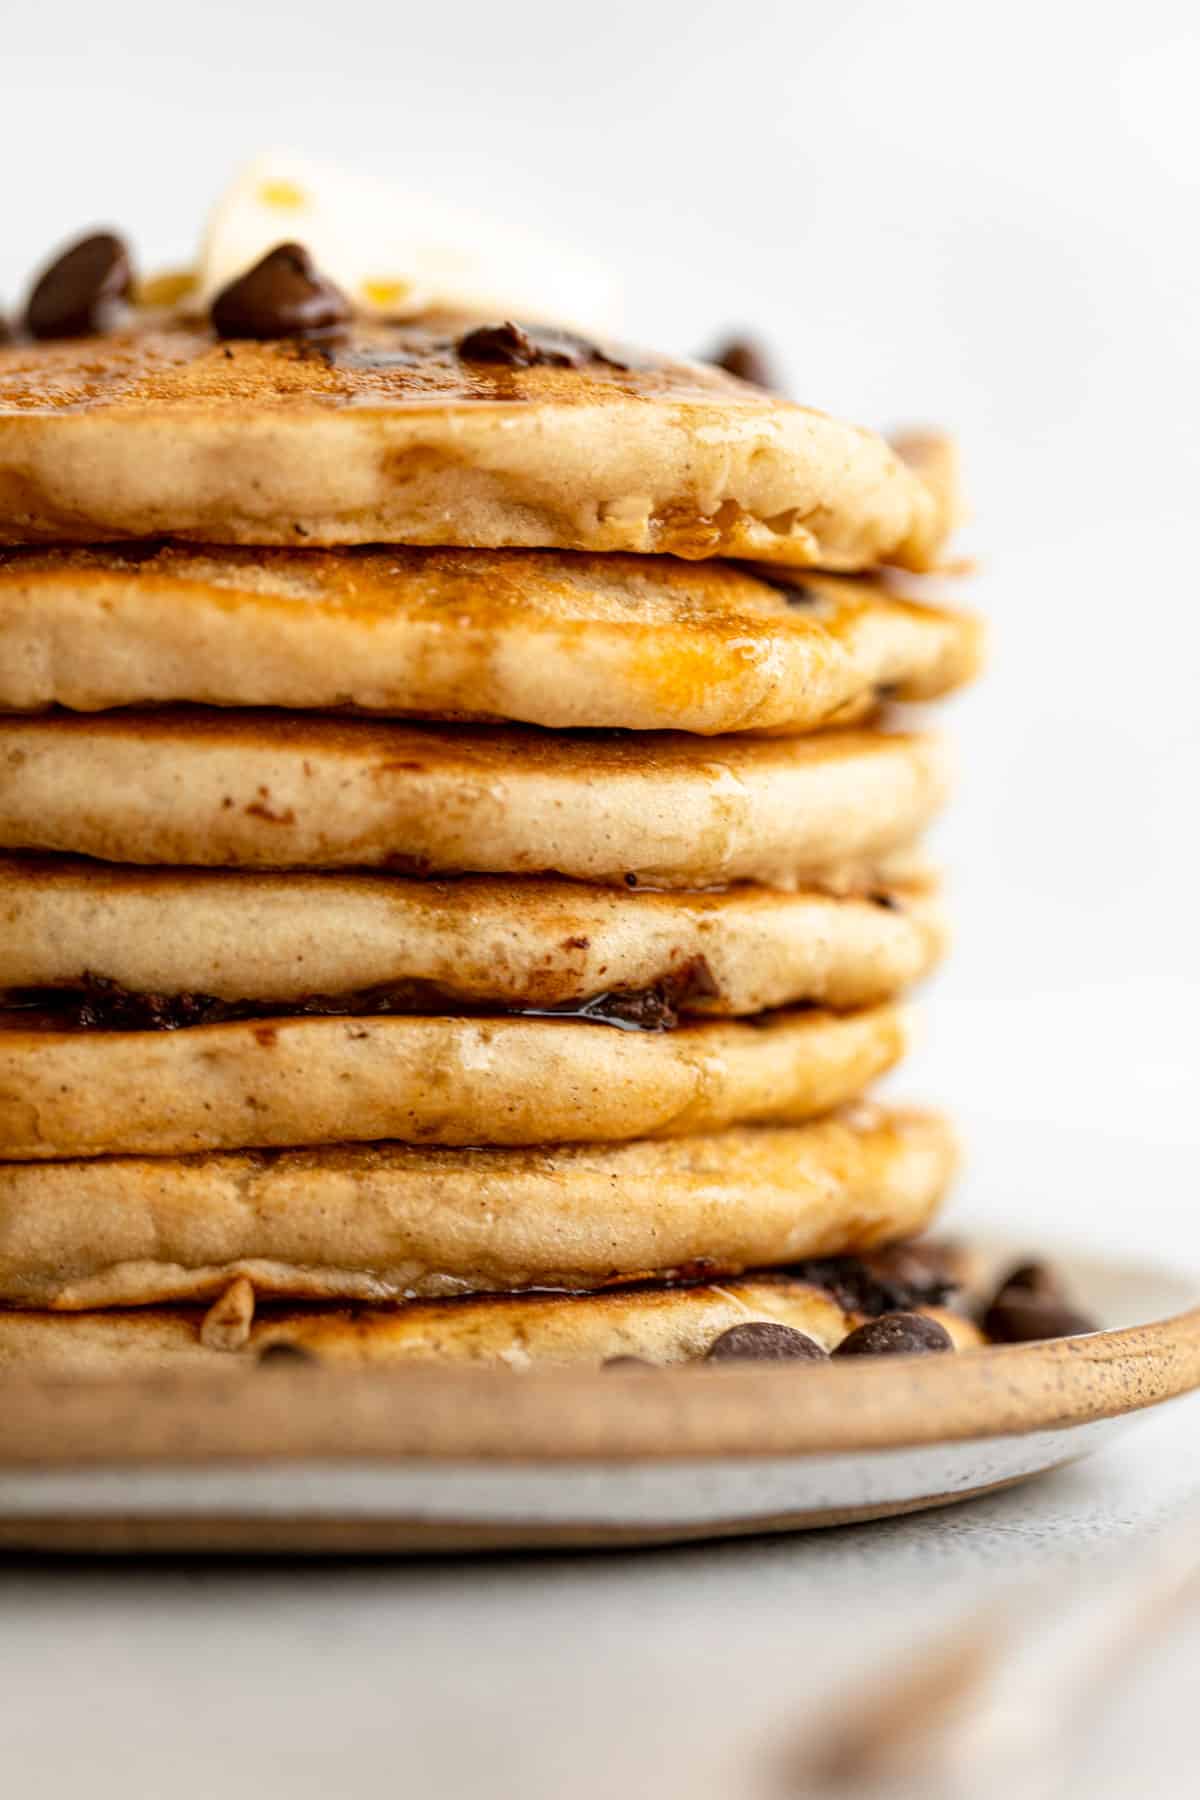 up close image of the stack of fluffy gluten free pancakes with chocolate chips